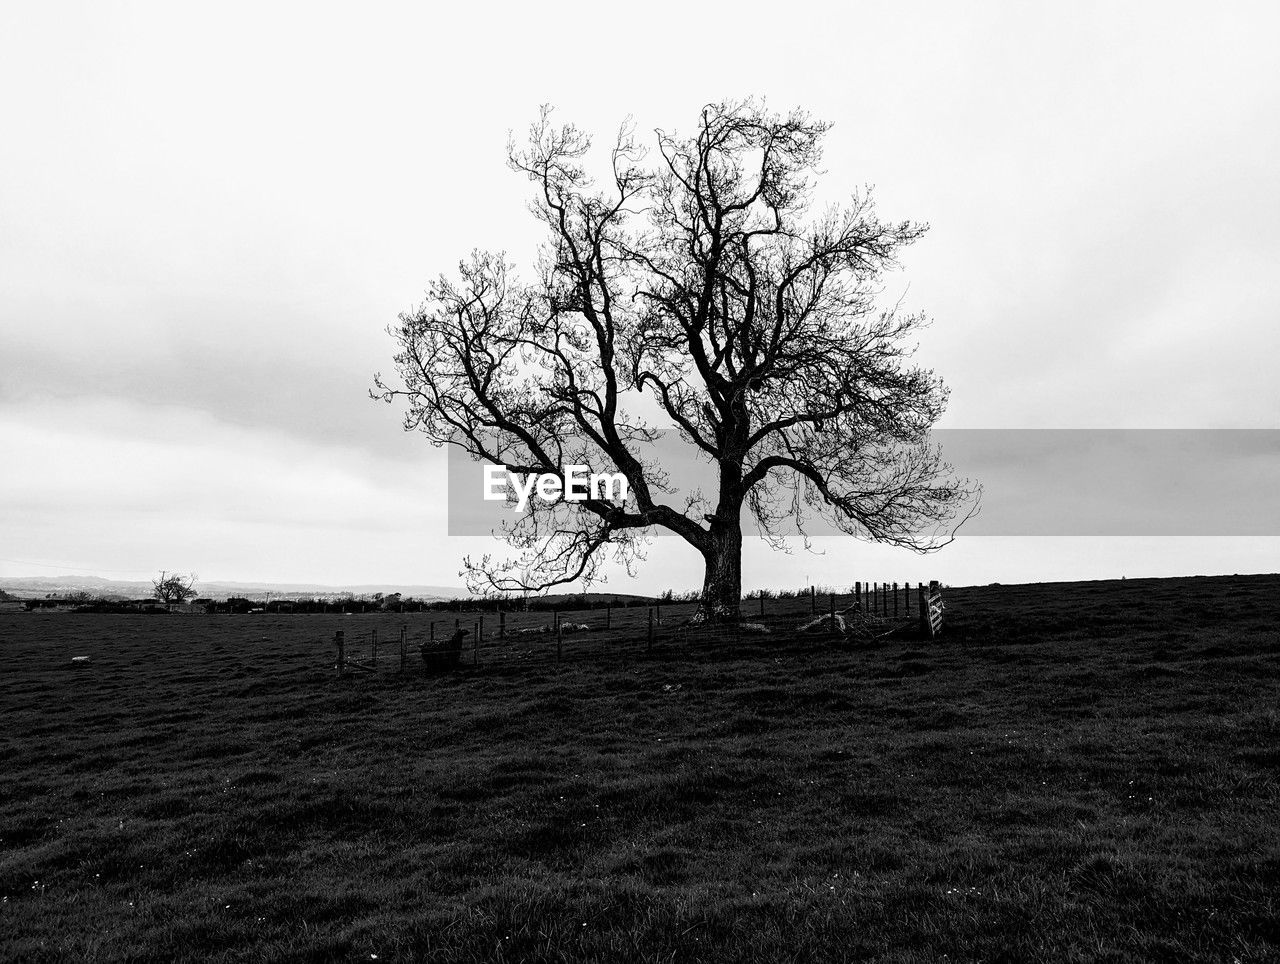 sky, plant, tree, landscape, environment, black and white, land, nature, field, monochrome, bare tree, cloud, tranquility, beauty in nature, monochrome photography, scenics - nature, horizon, tranquil scene, no people, grass, non-urban scene, outdoors, rural scene, hill, single tree, day, silhouette, horizon over land, rural area, remote, branch